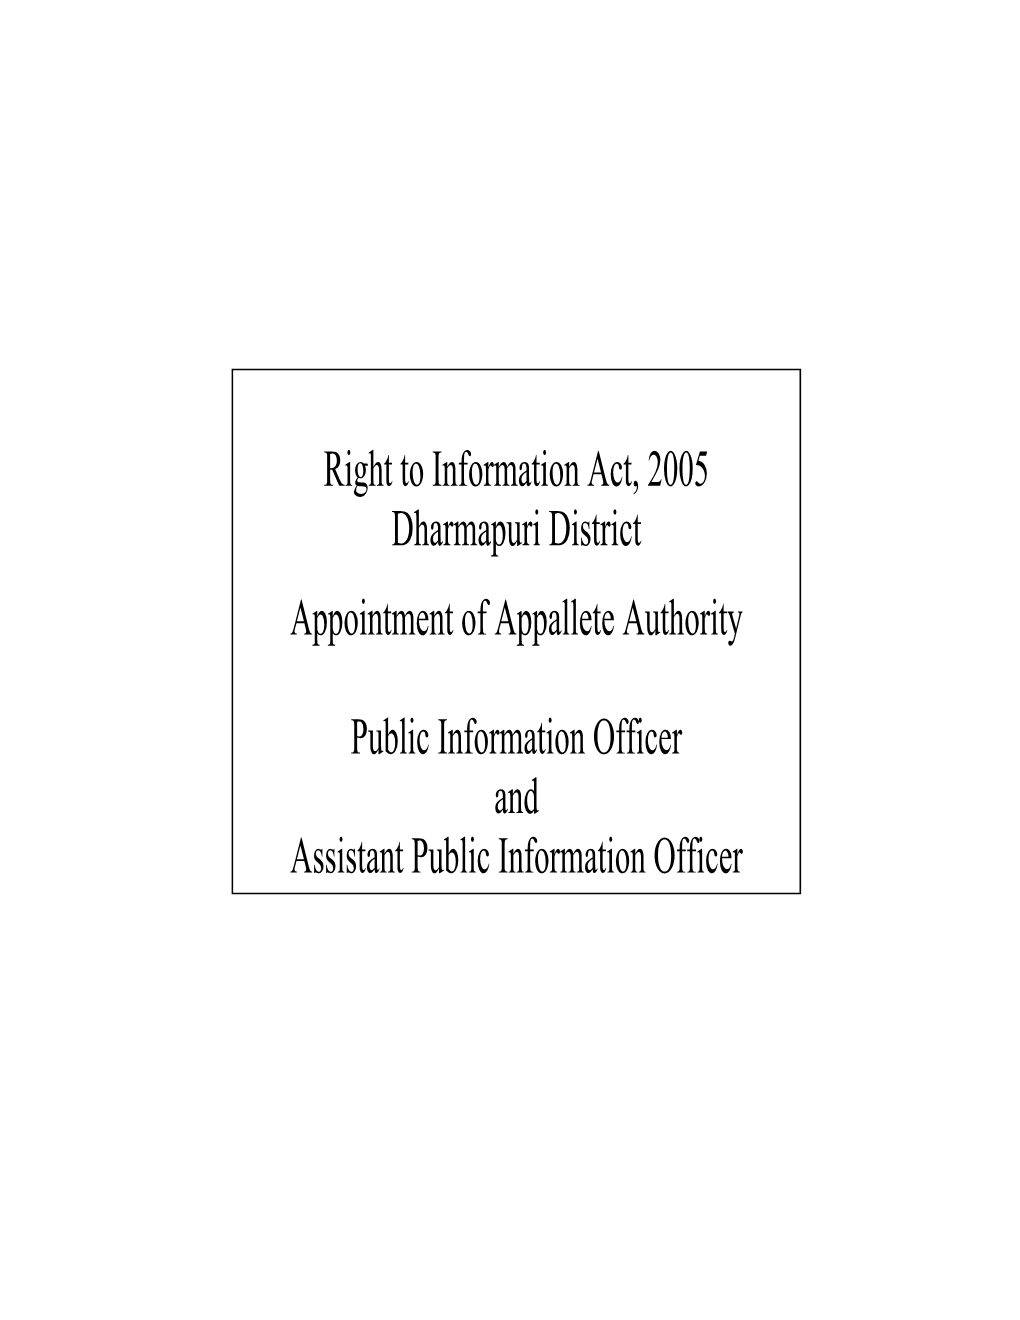 Right to Information Act, 2005 Dharmapuri District Appointment Of